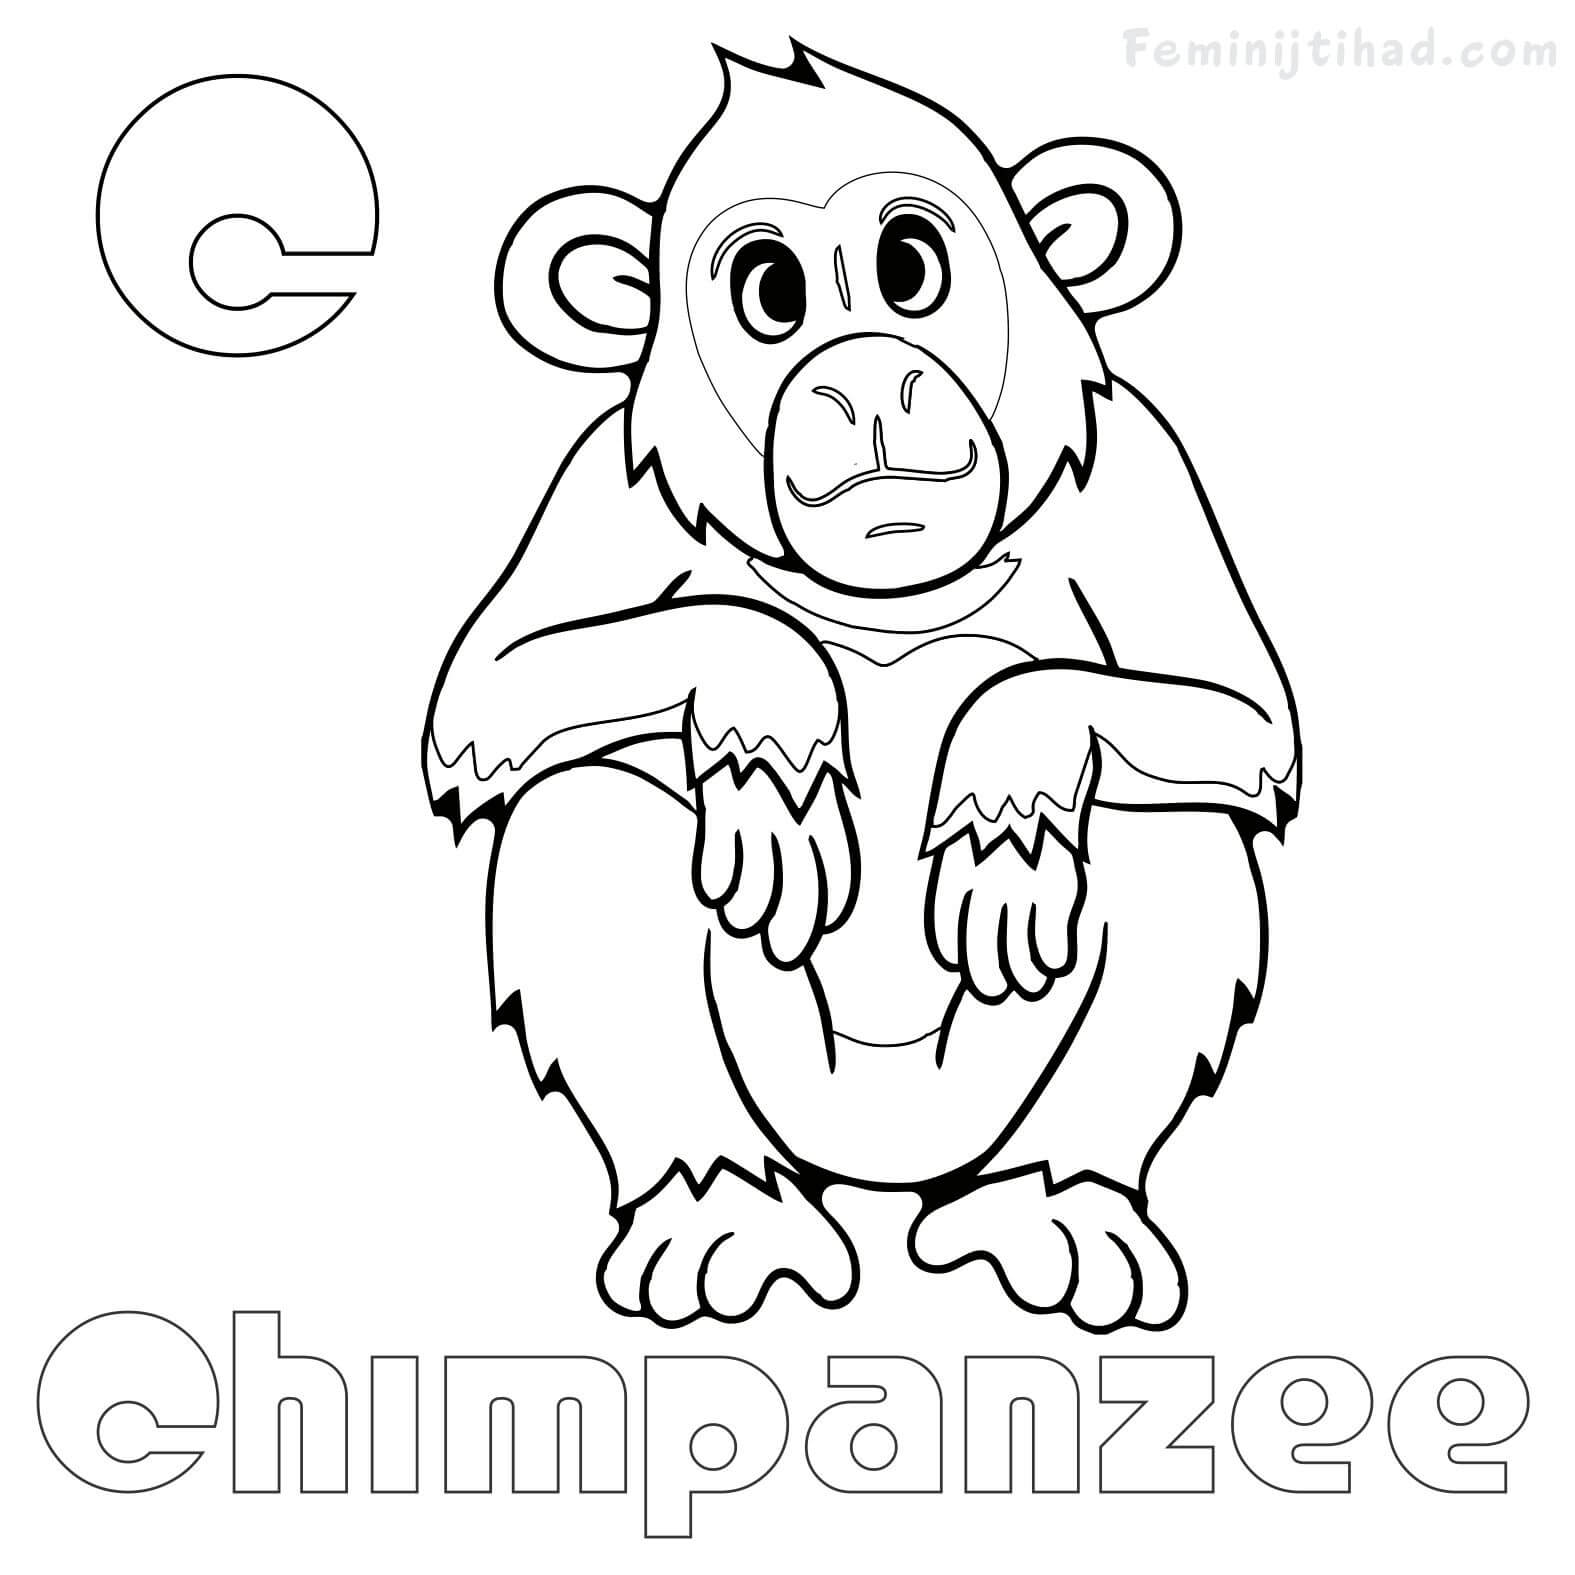 chimpanzee coloring pages to print